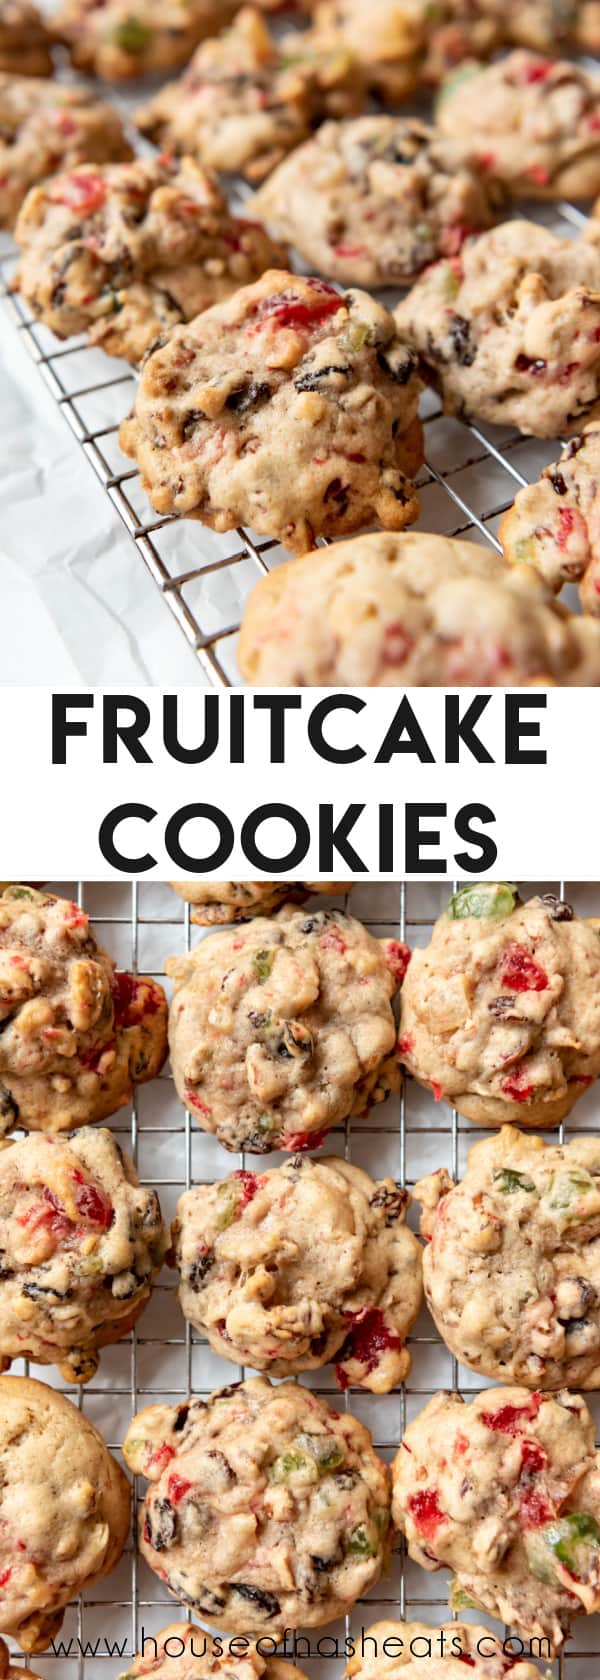 A collage of images of fruitcake cookies with text overlay.